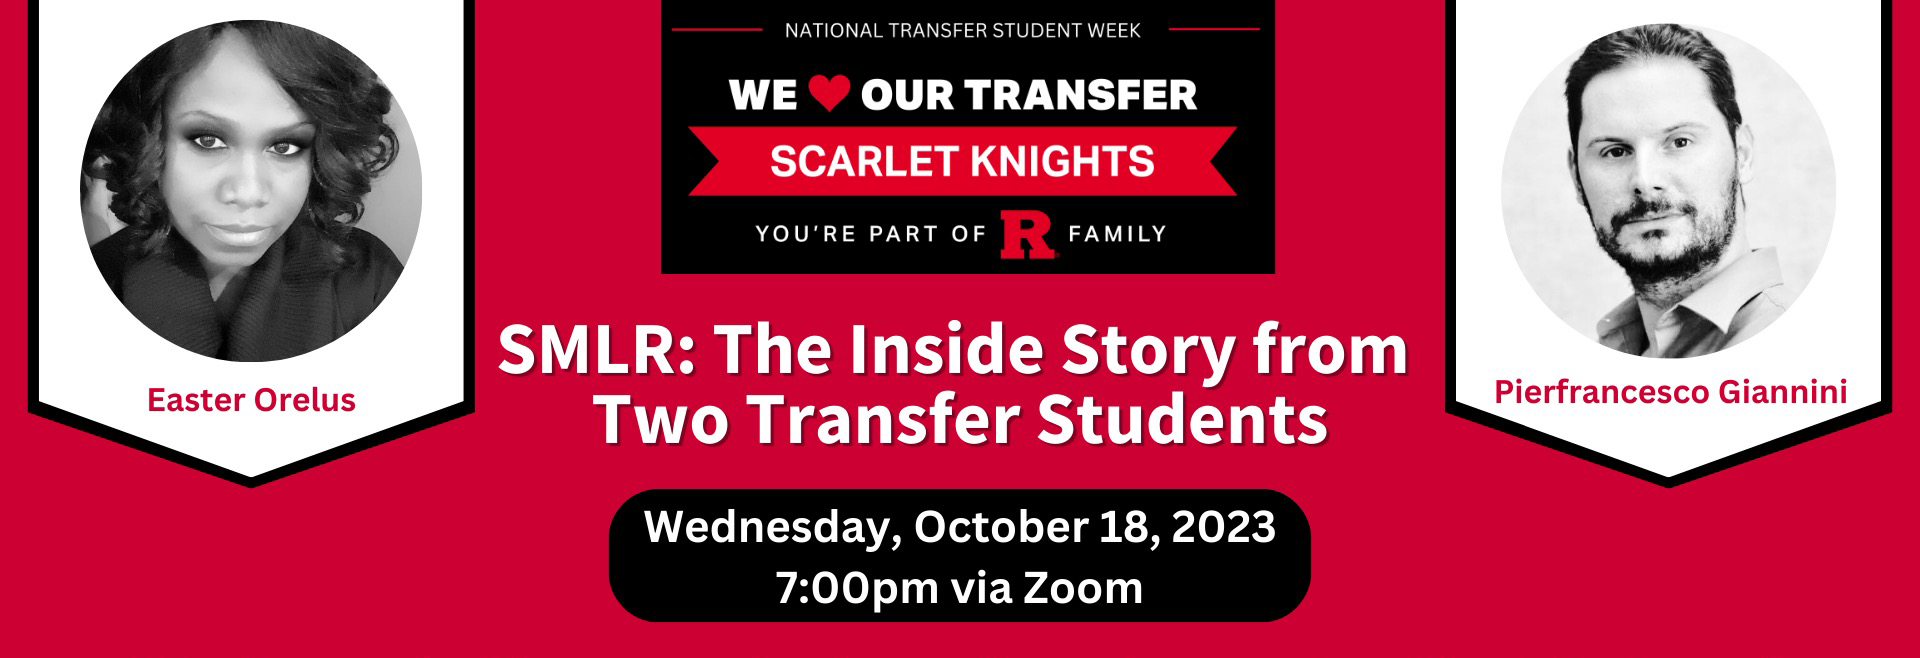 Image of Transfer Student Week discussion event